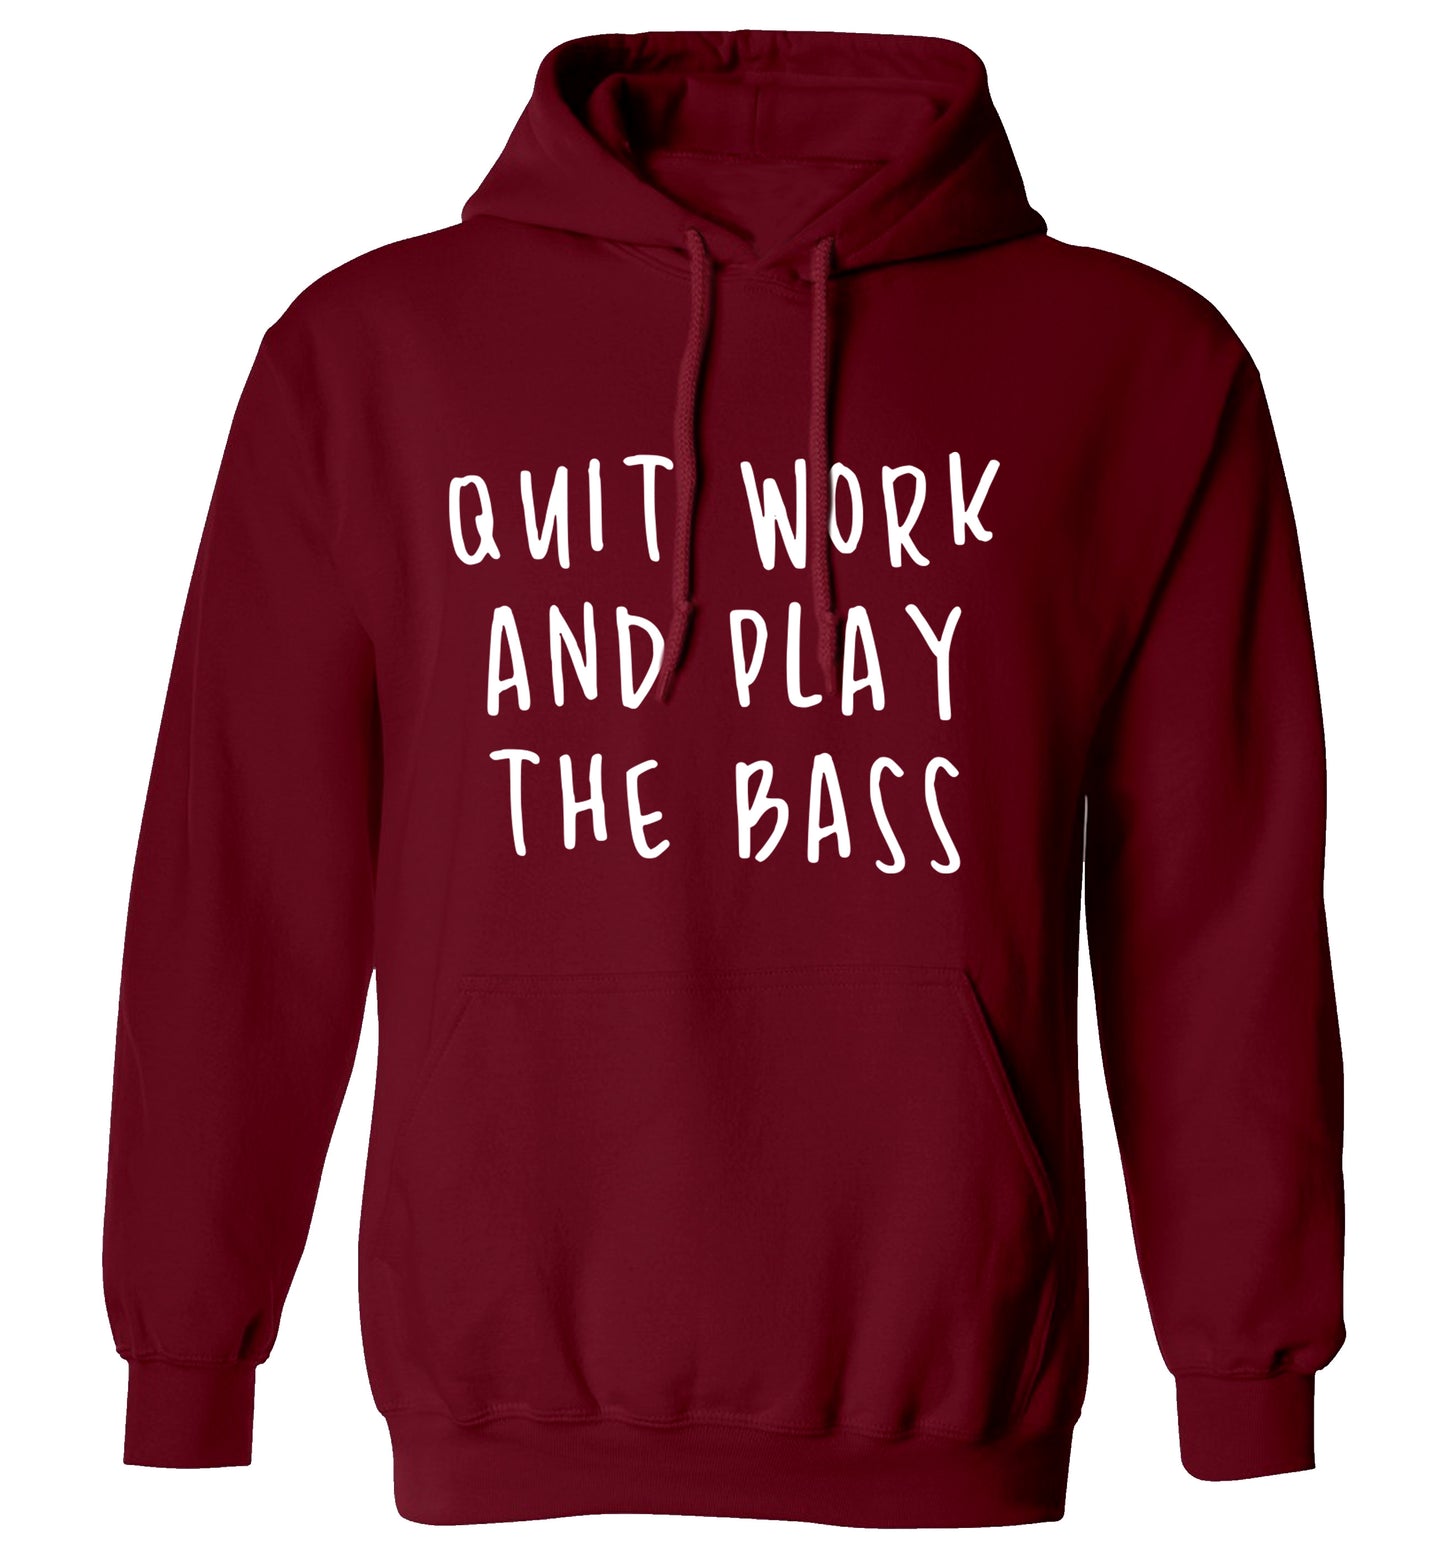 Quit work and play the bass adults unisex maroon hoodie 2XL